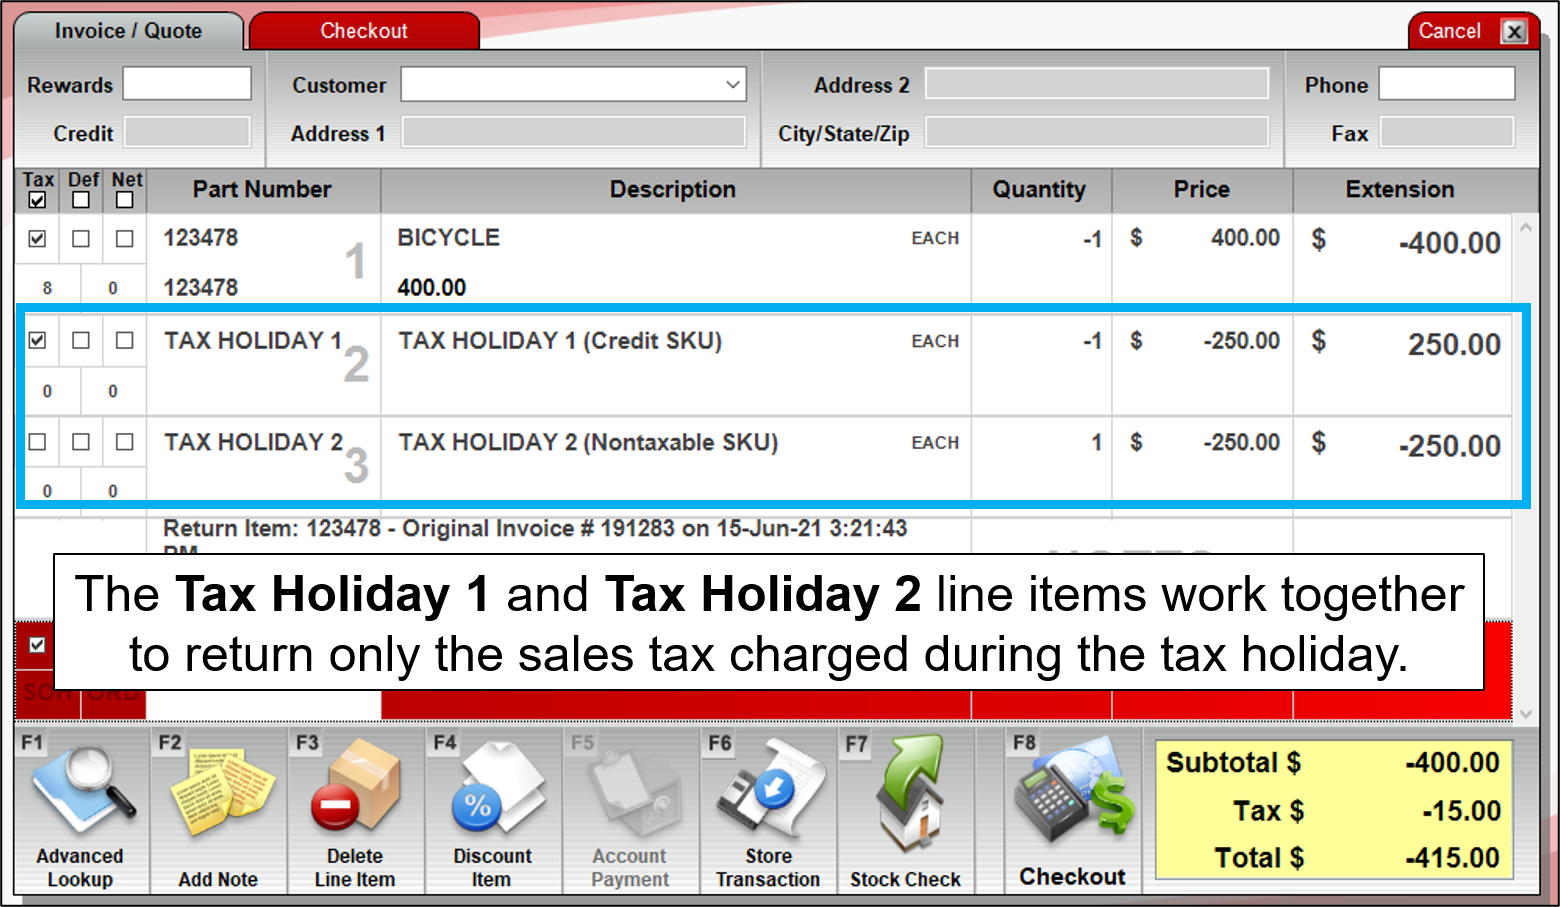 Tax Holiday line items will adjust the tax for the tax holiday